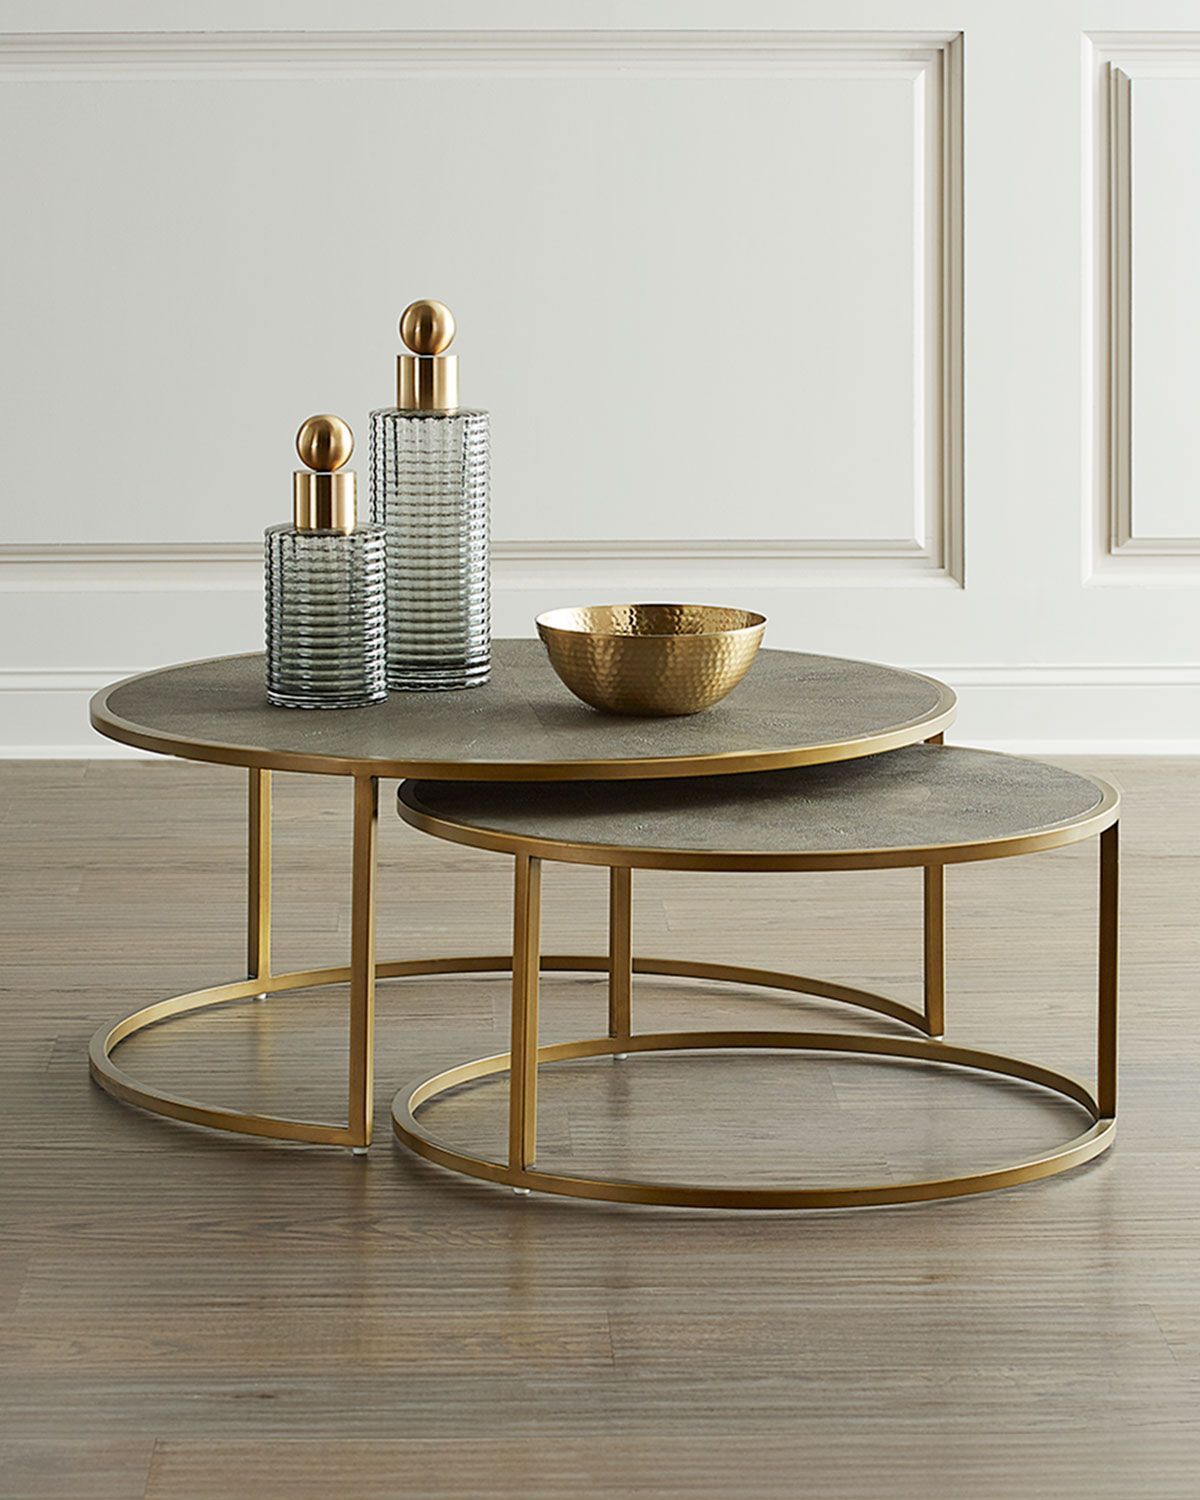 Four Hands Ginny Nesting Coffee Tables In 2021 | Nesting Coffee Tables For Round Gold Metal Cage Nesting Ottomans Set Of  (View 5 of 20)